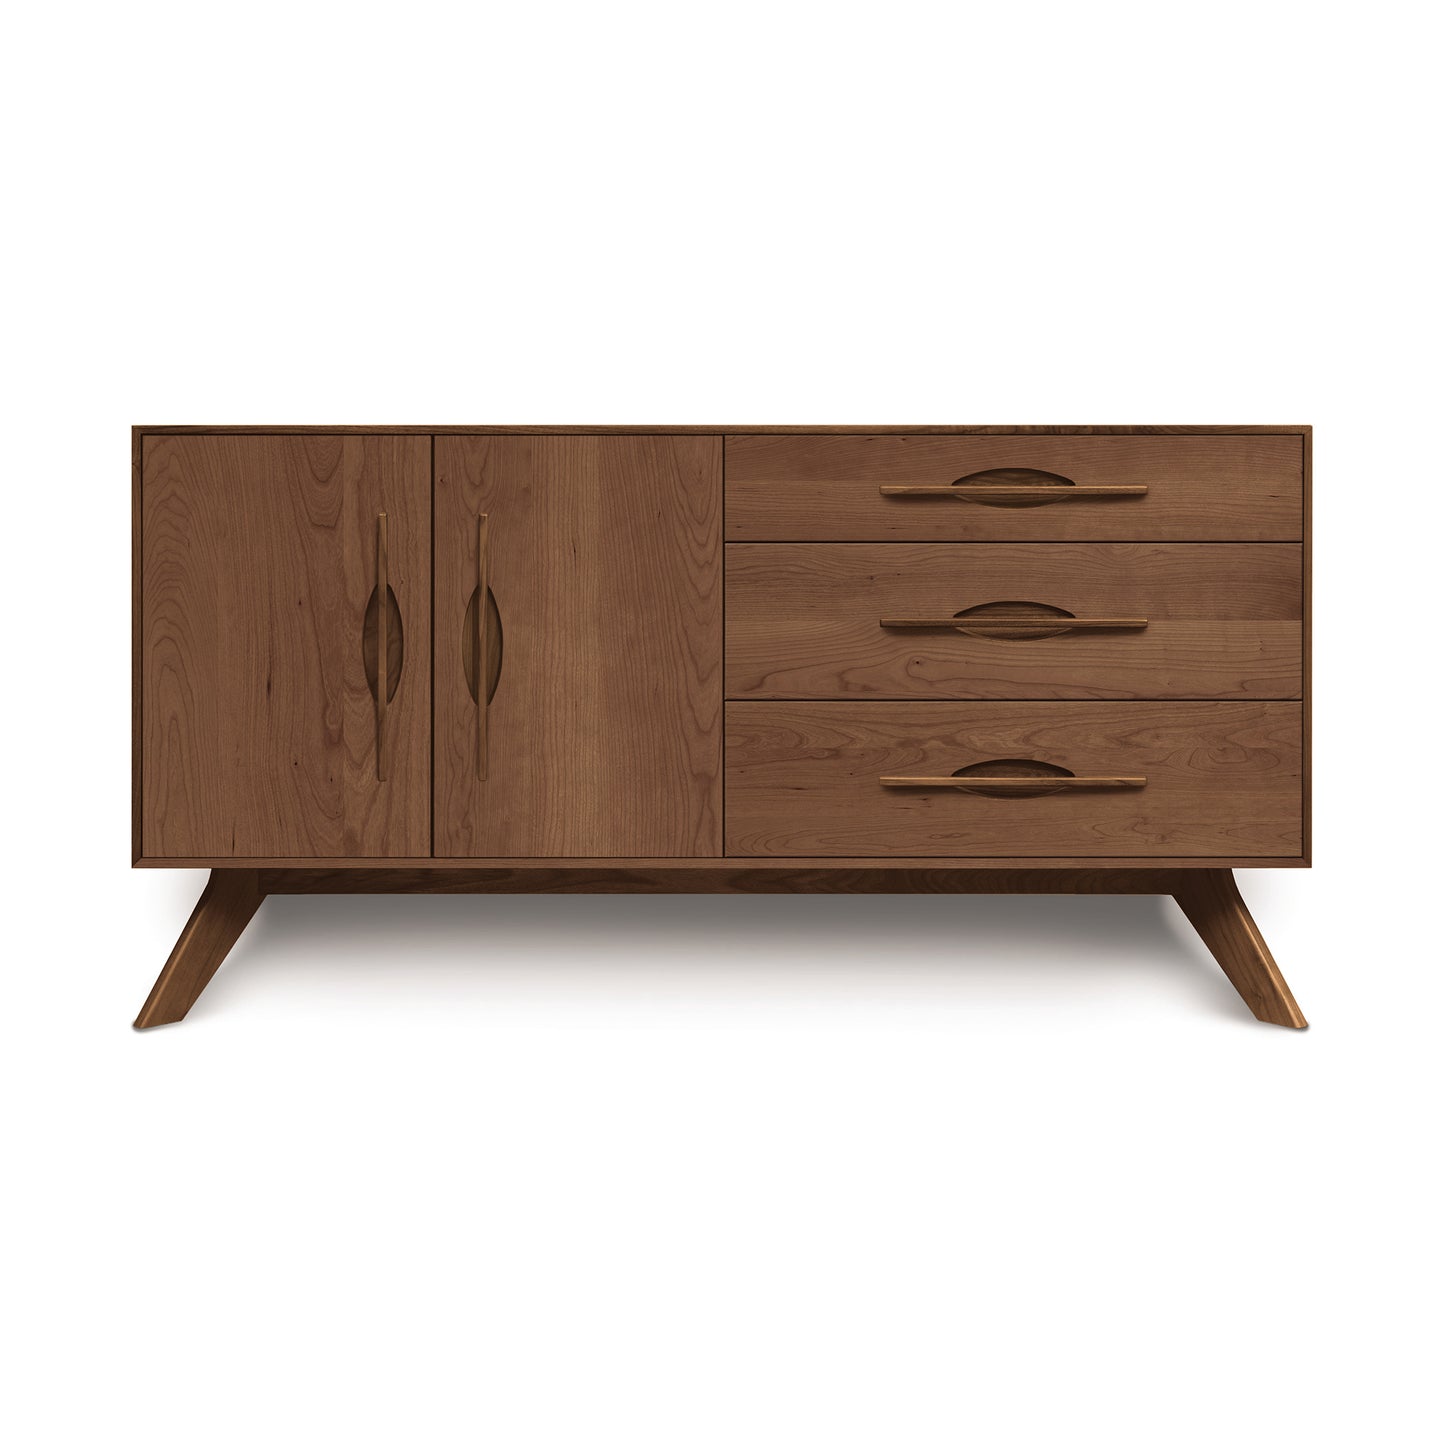 A mid-century modern style Audrey 2-Door 3-Drawer Buffet by Copeland Furniture, featuring two cabinet doors and three drawers with tapered legs.